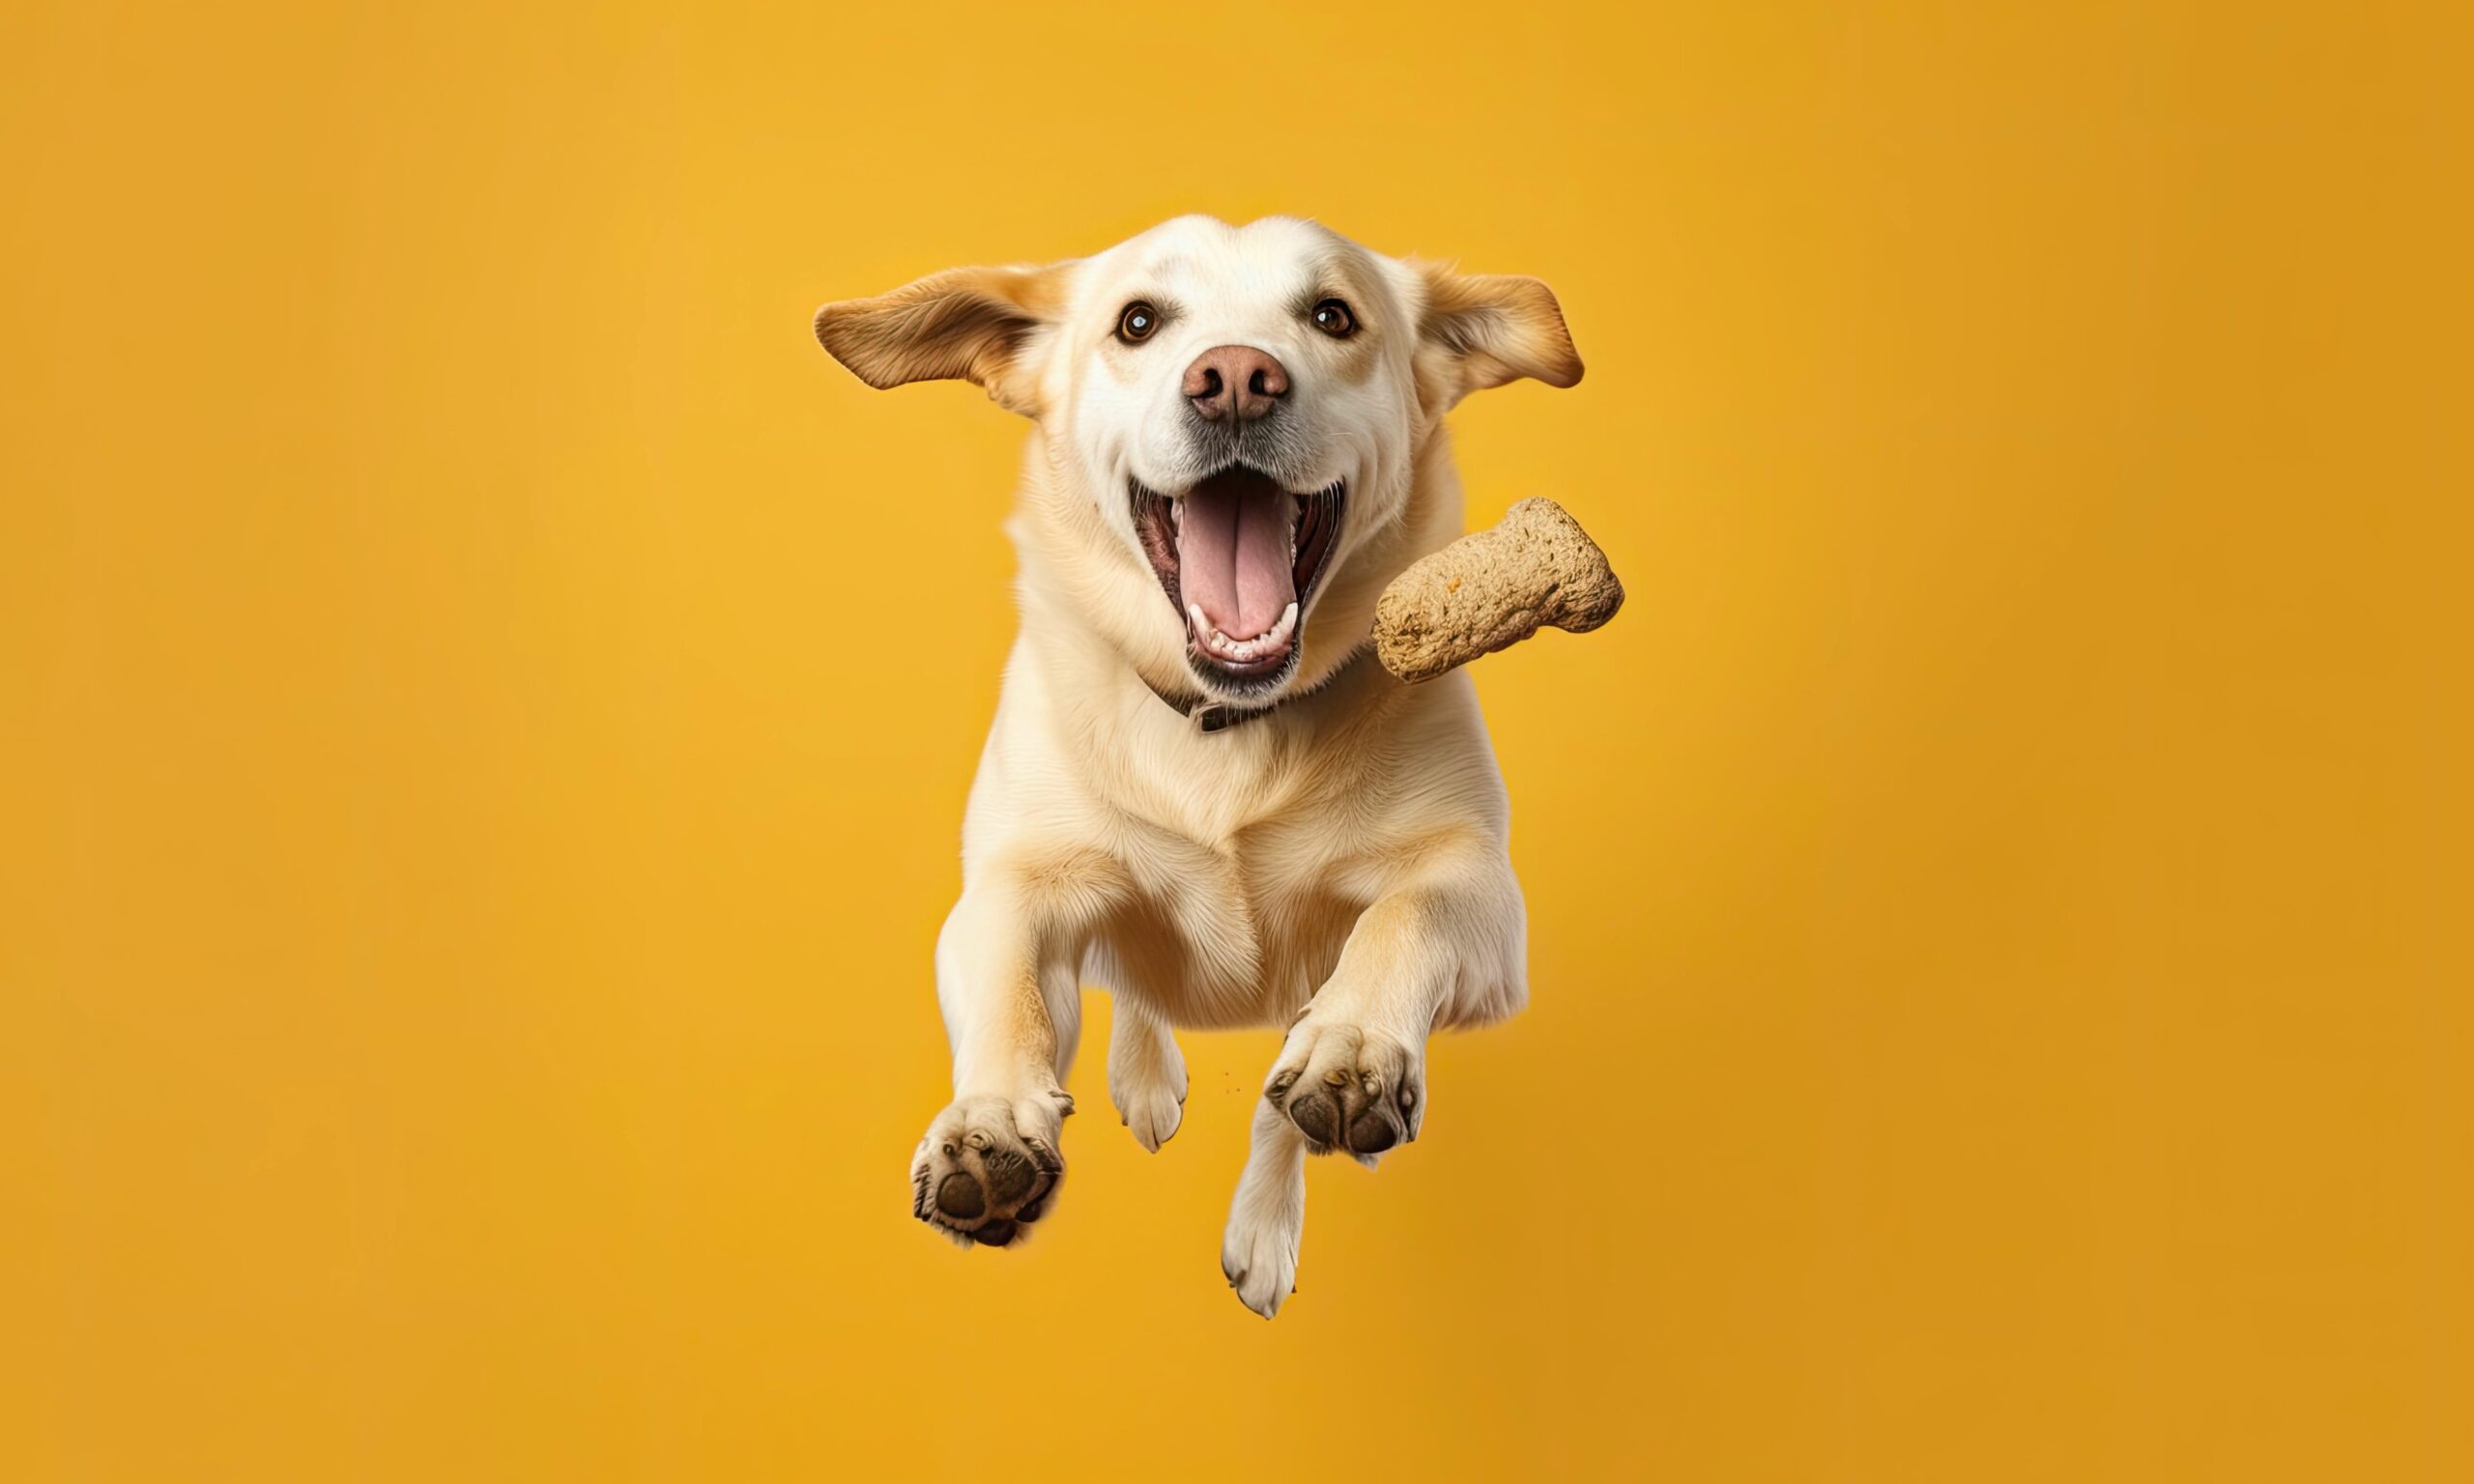 A golden lab jumping in mid-air against a yellow backdrop. The dog is jumping toward a treat that is also mid-air.